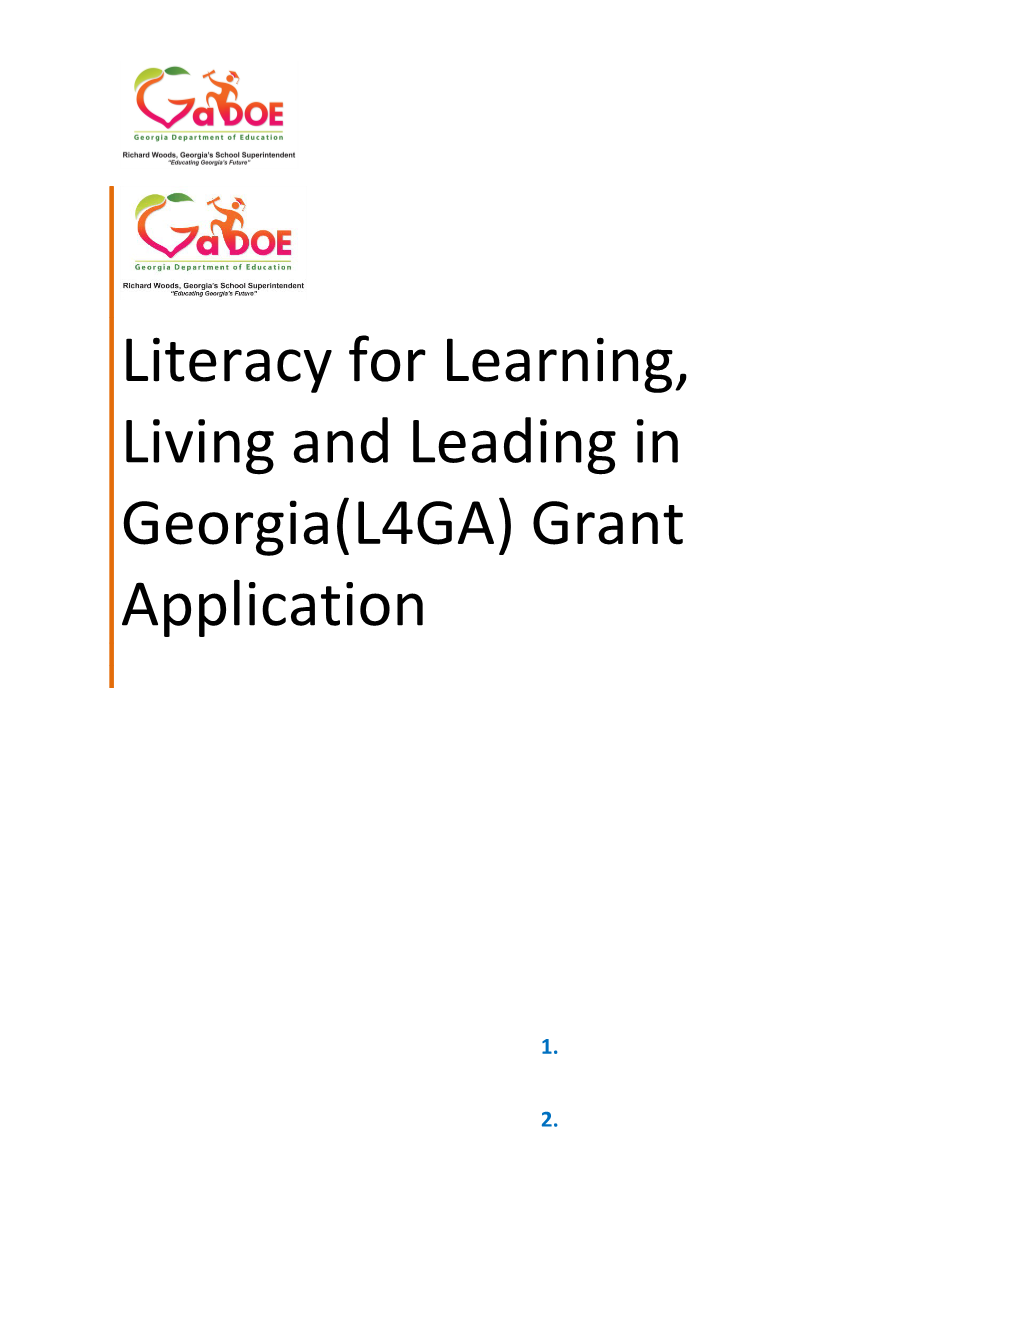 Literacy for Learning, Living and Leading in Georgia(L4GA) Grant Application